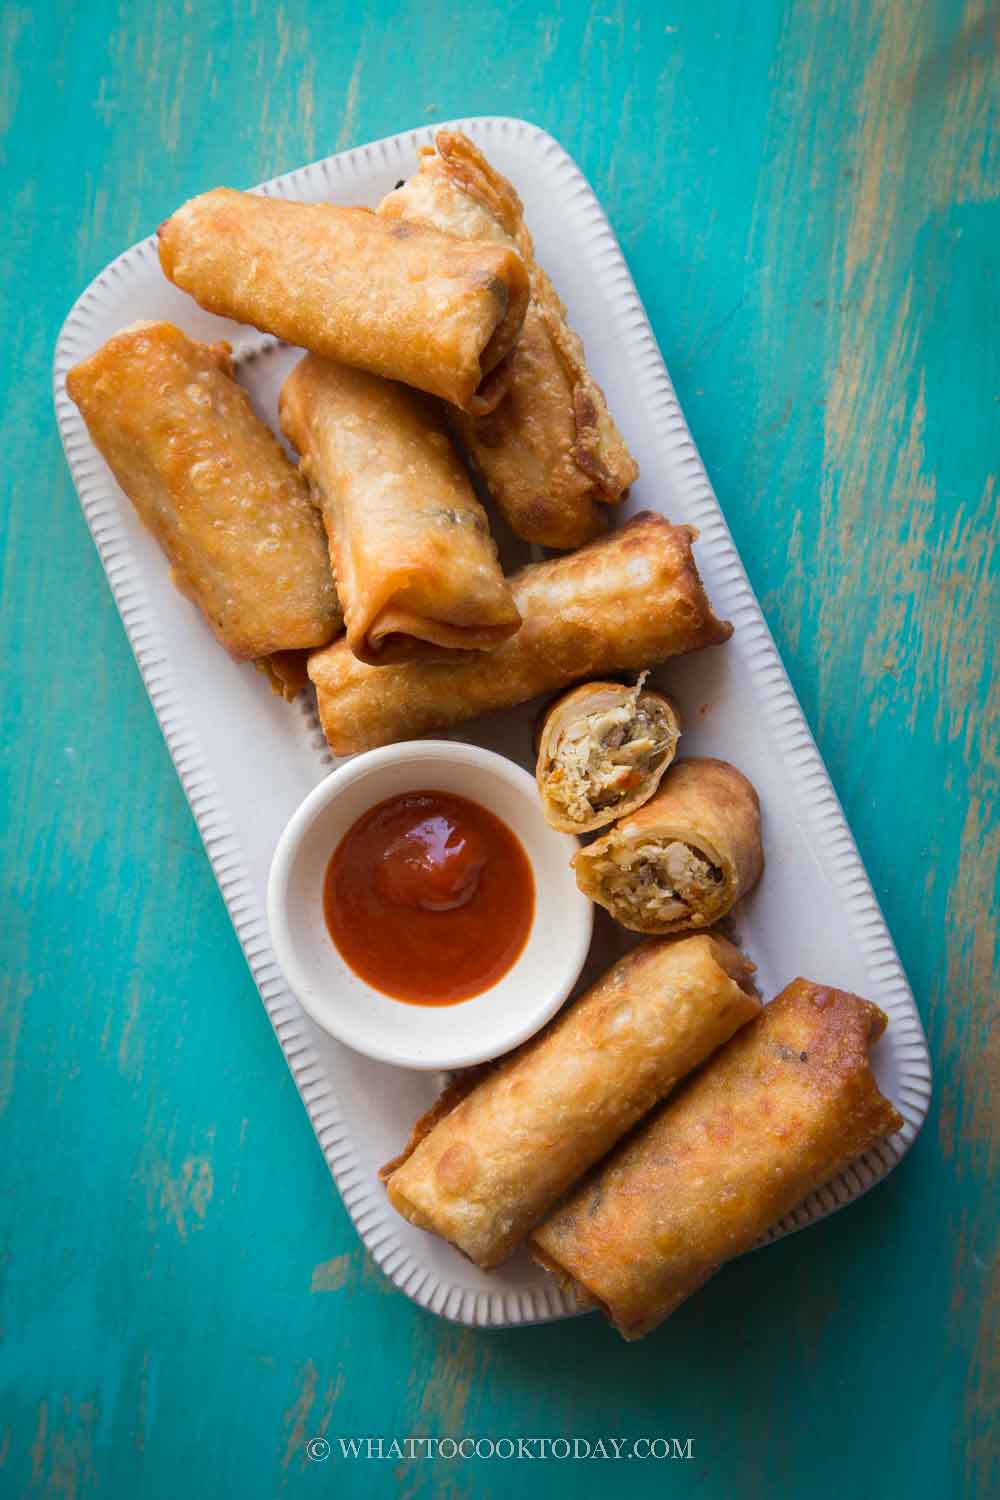 How To Make Gluten-Free Spring Roll Wrappers